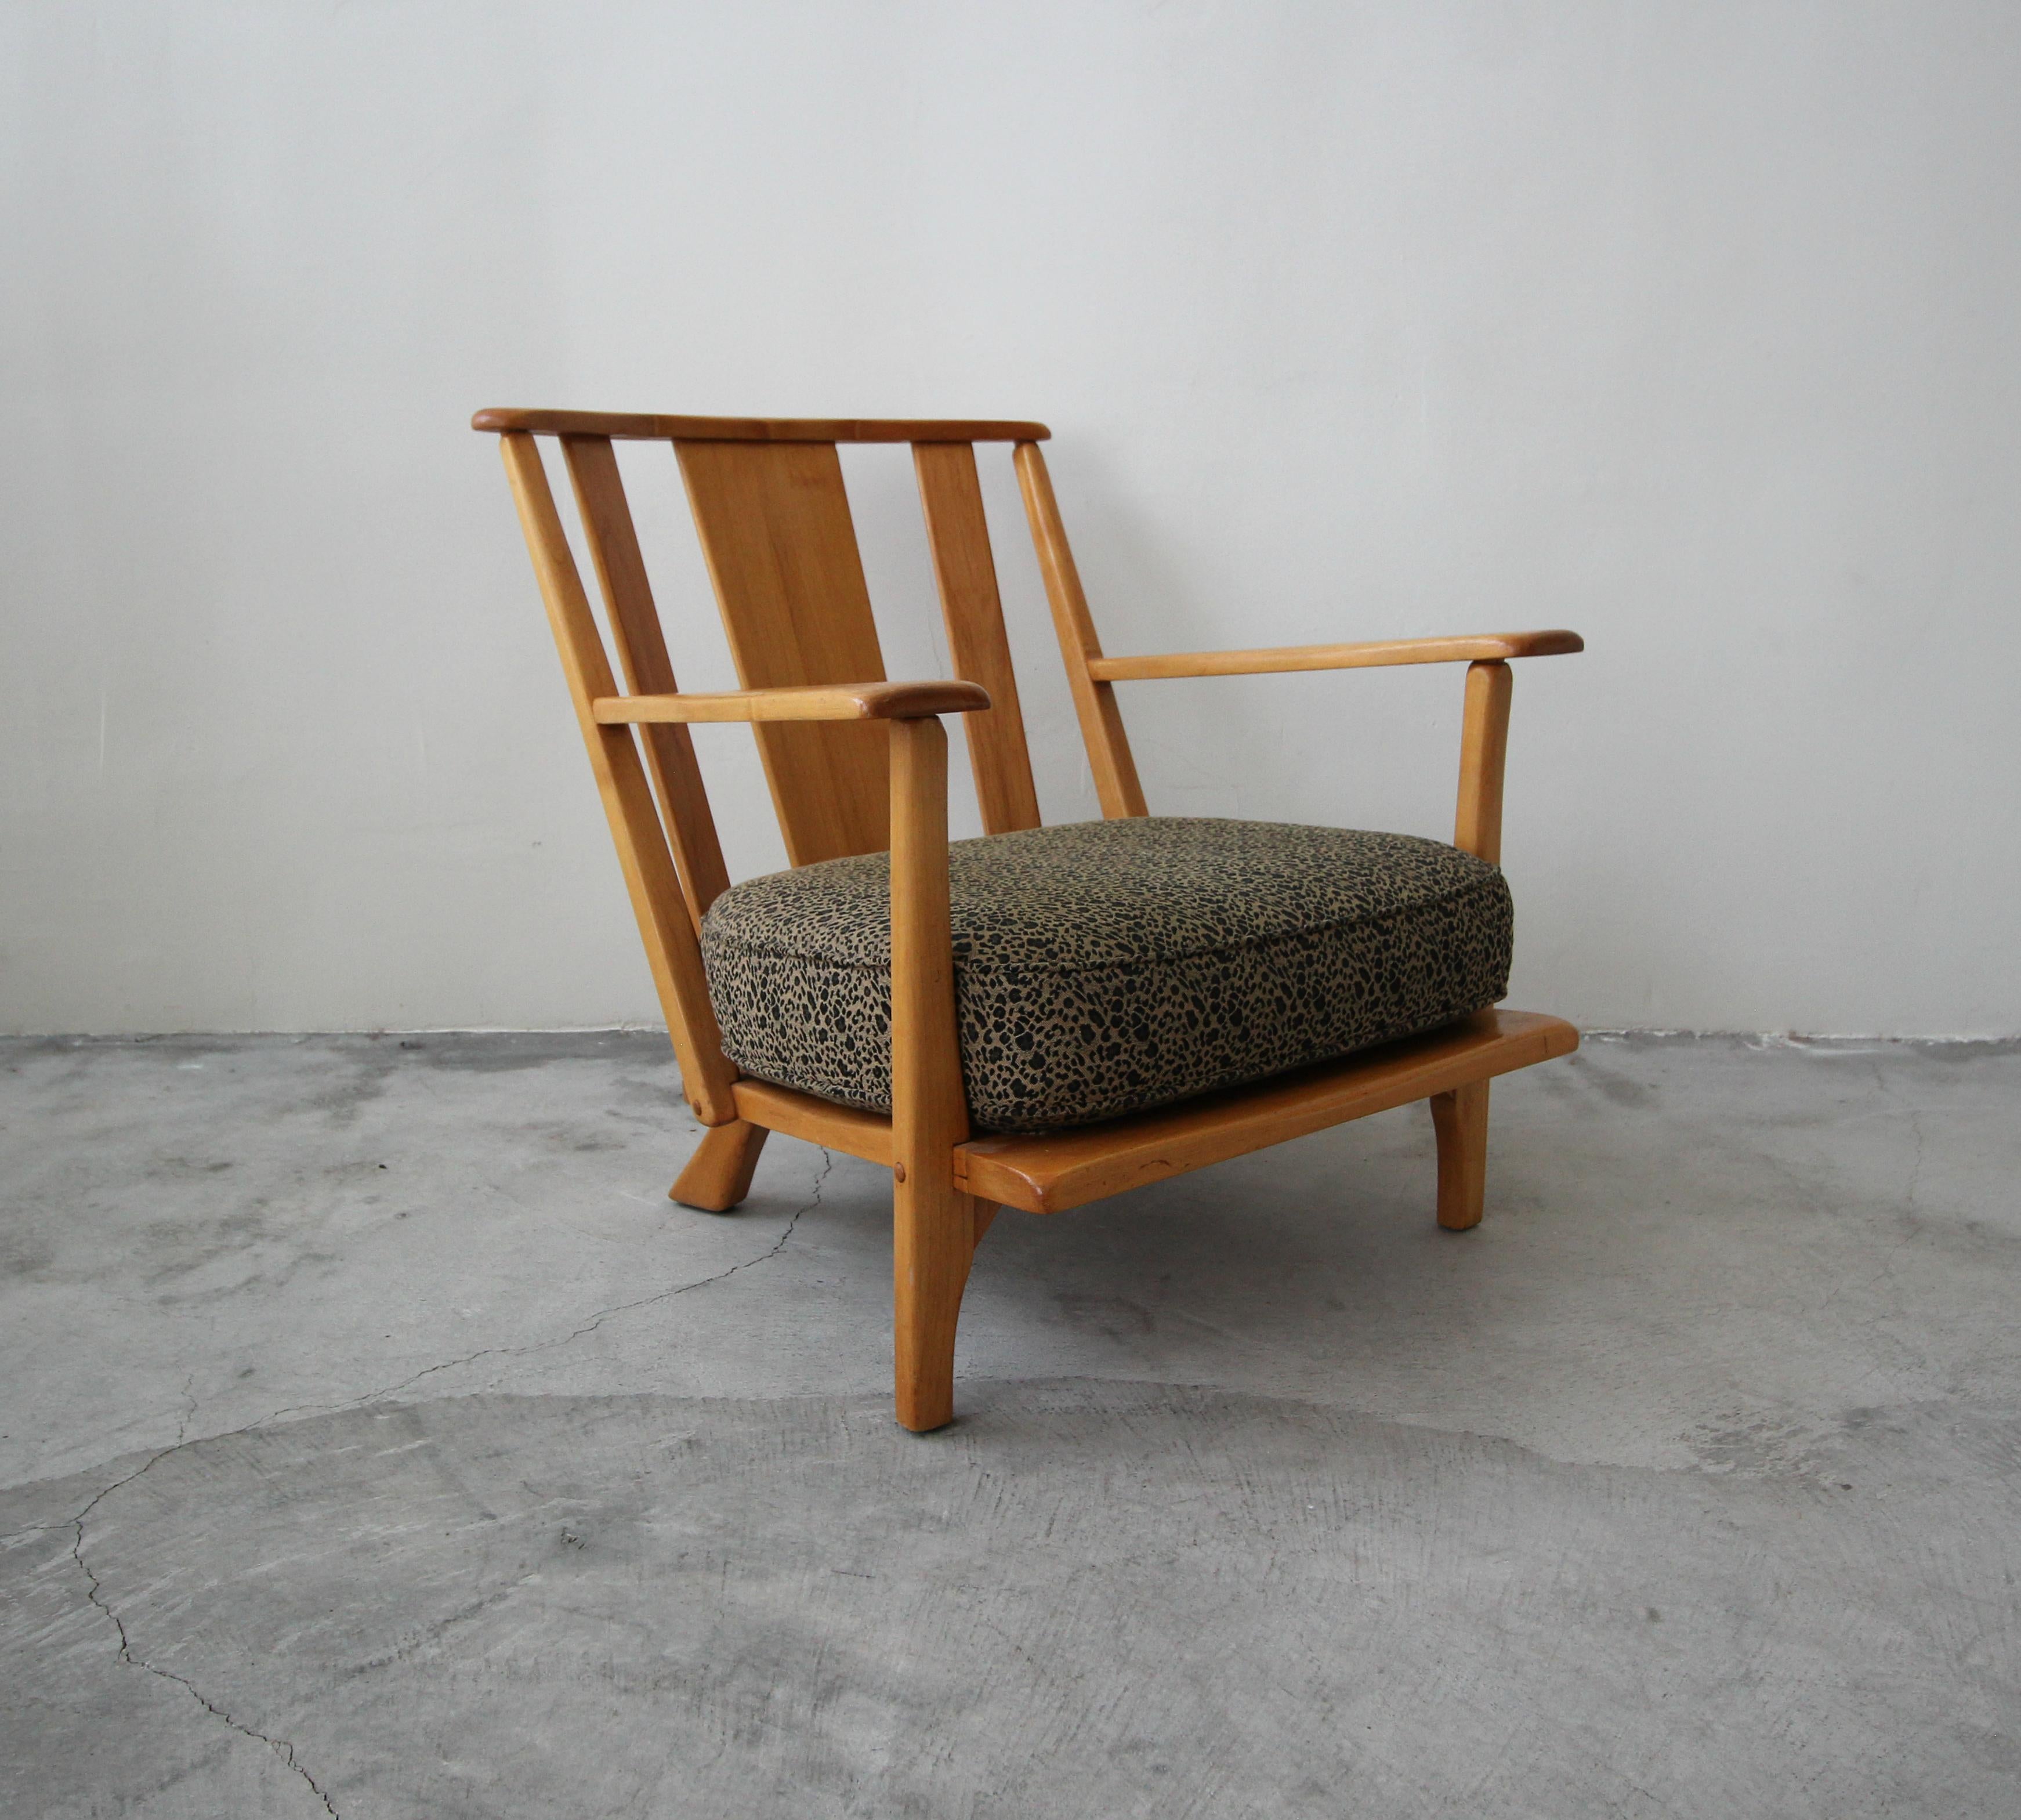 Maple Midcentury Craftsman Style Lounge Chair by Cushman